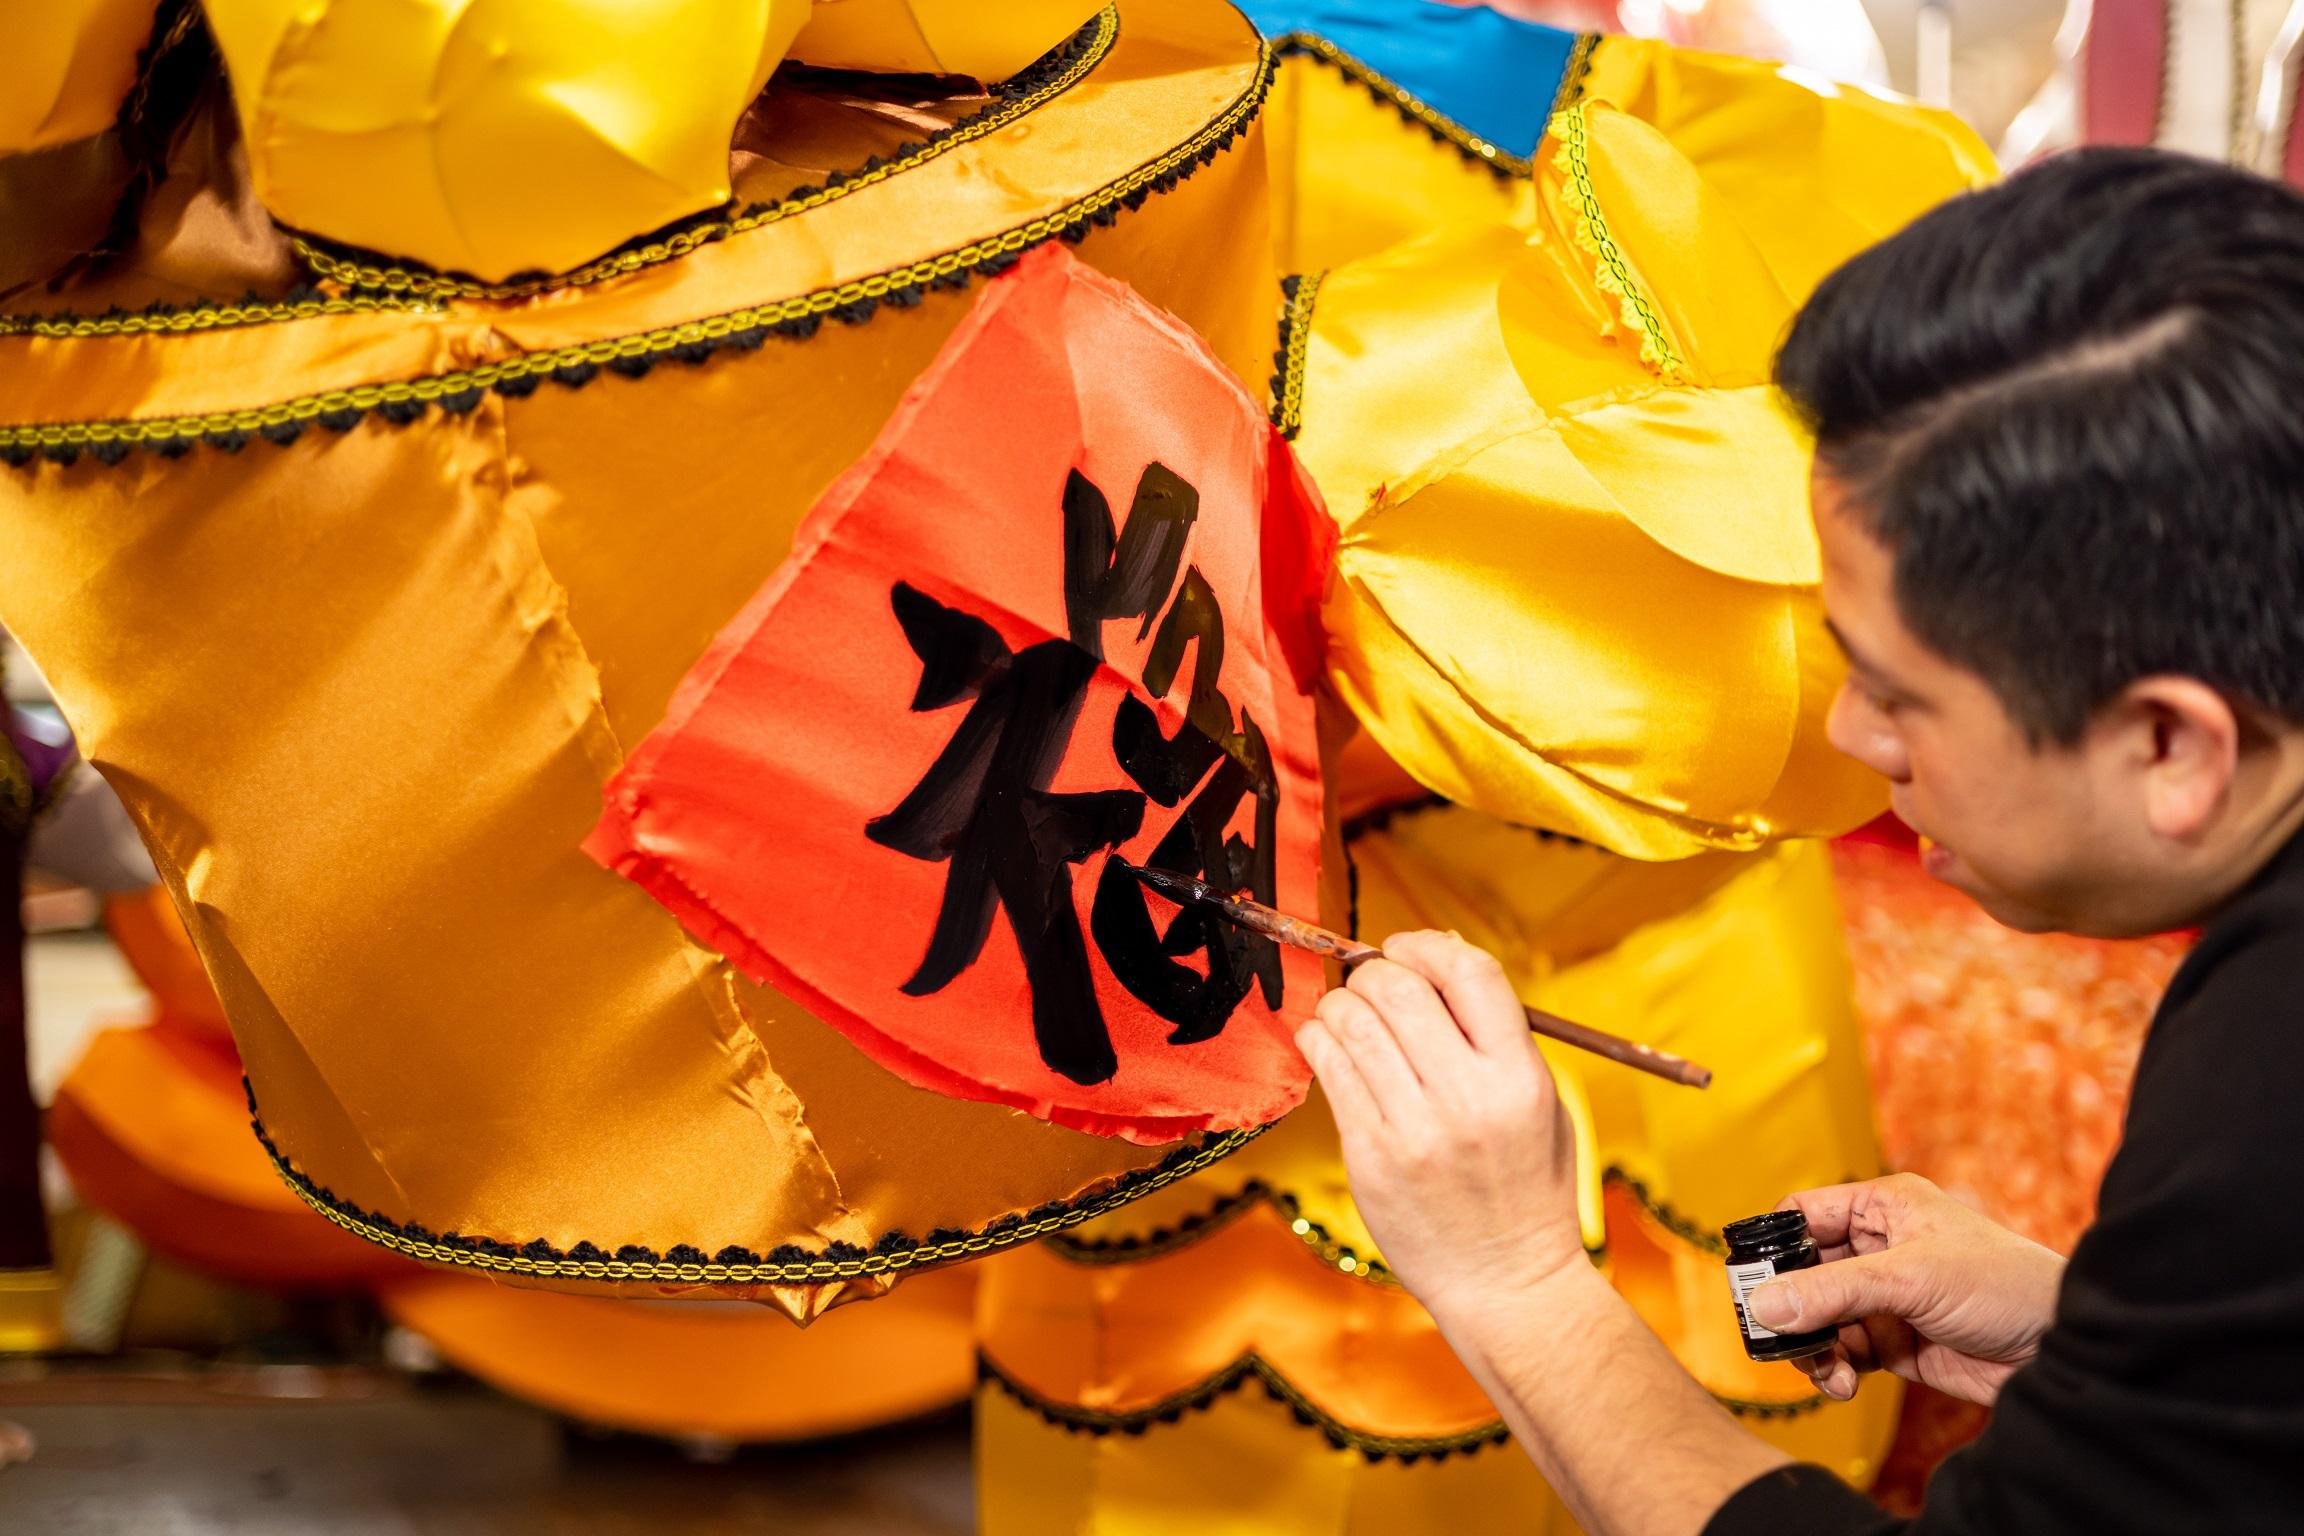 The Leisure and Cultural Services Department (LCSD) will present the Urban Lunar New Year Lantern Displays "The Luck-Bringing Rabbit - Lanterns to Celebrate the New Year" at the Hong Kong Cultural Centre (HKCC) Piazza from today (January 12) until February 7. Admission is free. The Intangible Cultural Heritage Office under the LCSD is collaborating with local master Hui Ka-hung (pictured), who has more than 30 years of experience in traditional paper crafting, to present lanterns in various forms.

